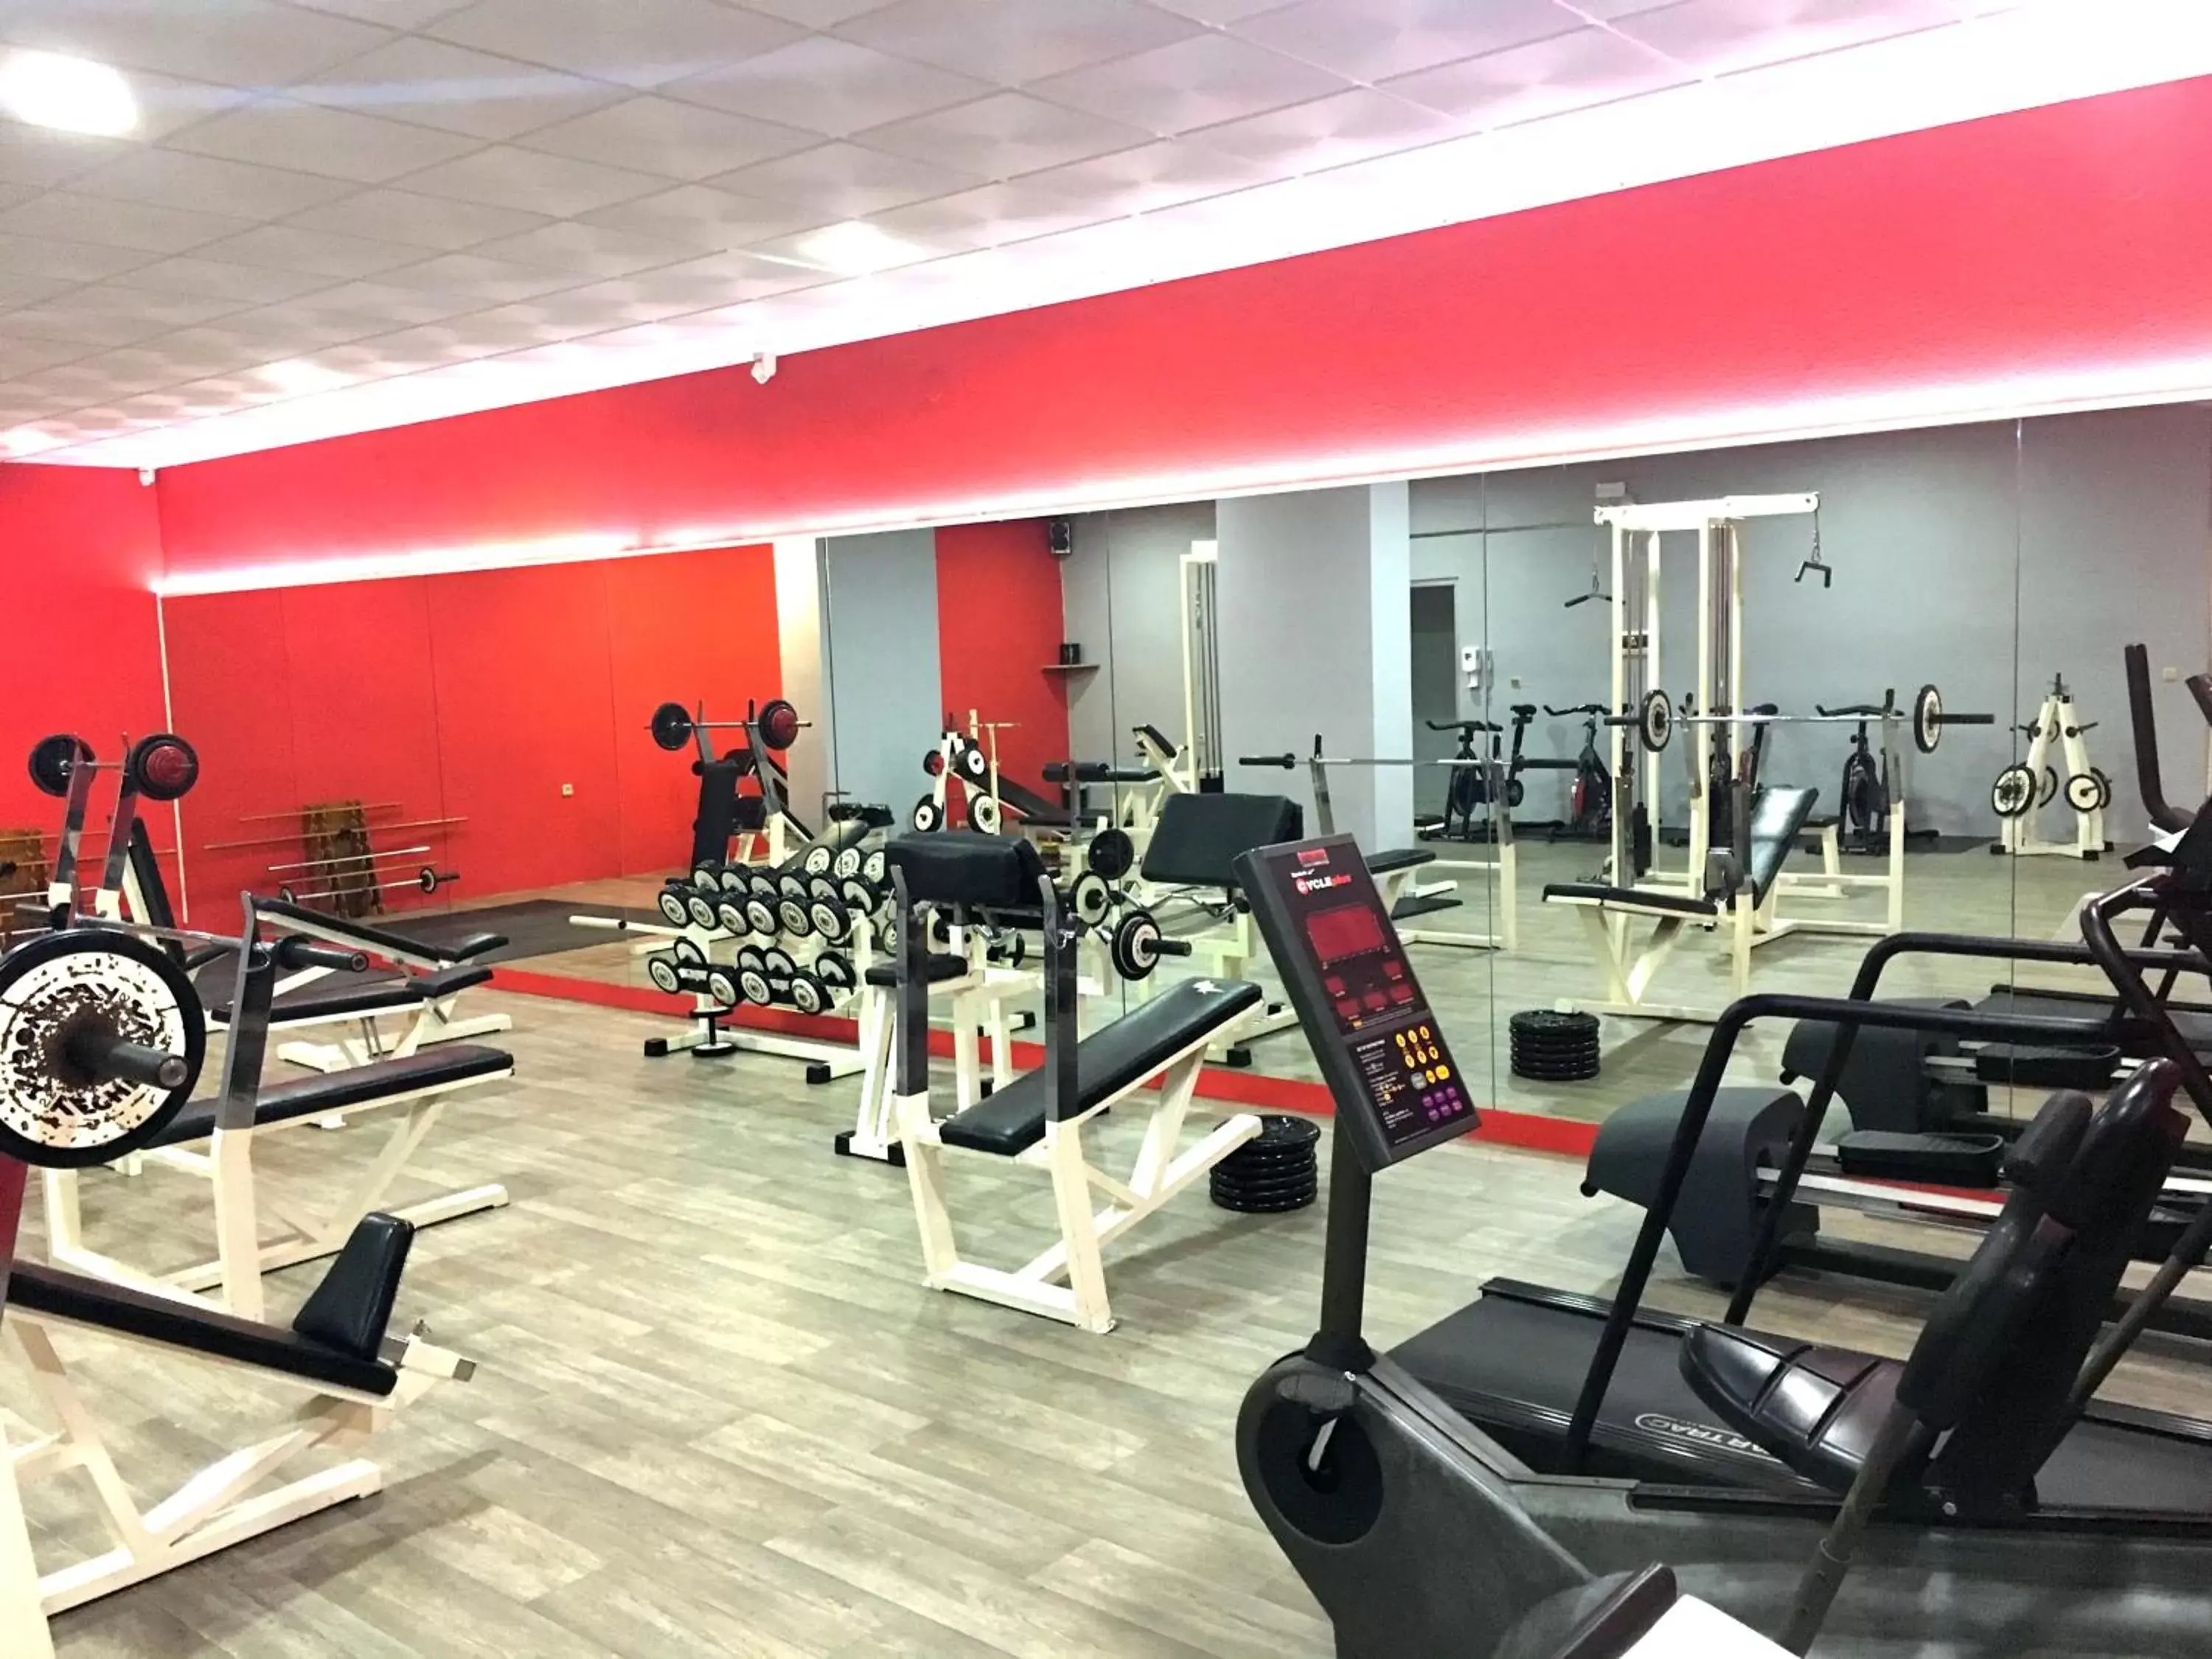 Fitness centre/facilities, Fitness Center/Facilities in First Flatotel International